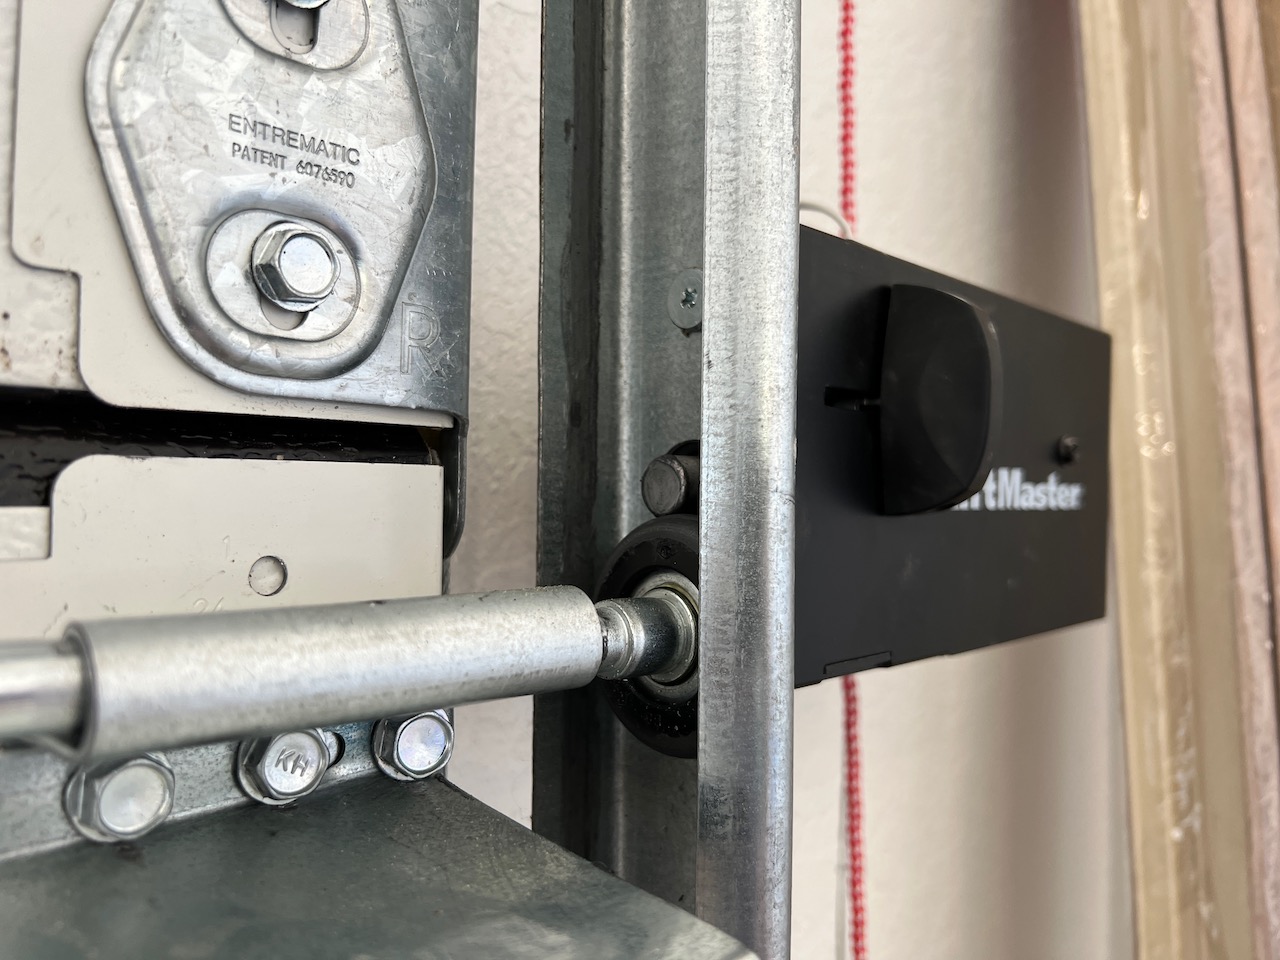 LiftMaster 841LM automatic lock installed on vertical track. If the door is raised, the roller will hit the deadbolt. 